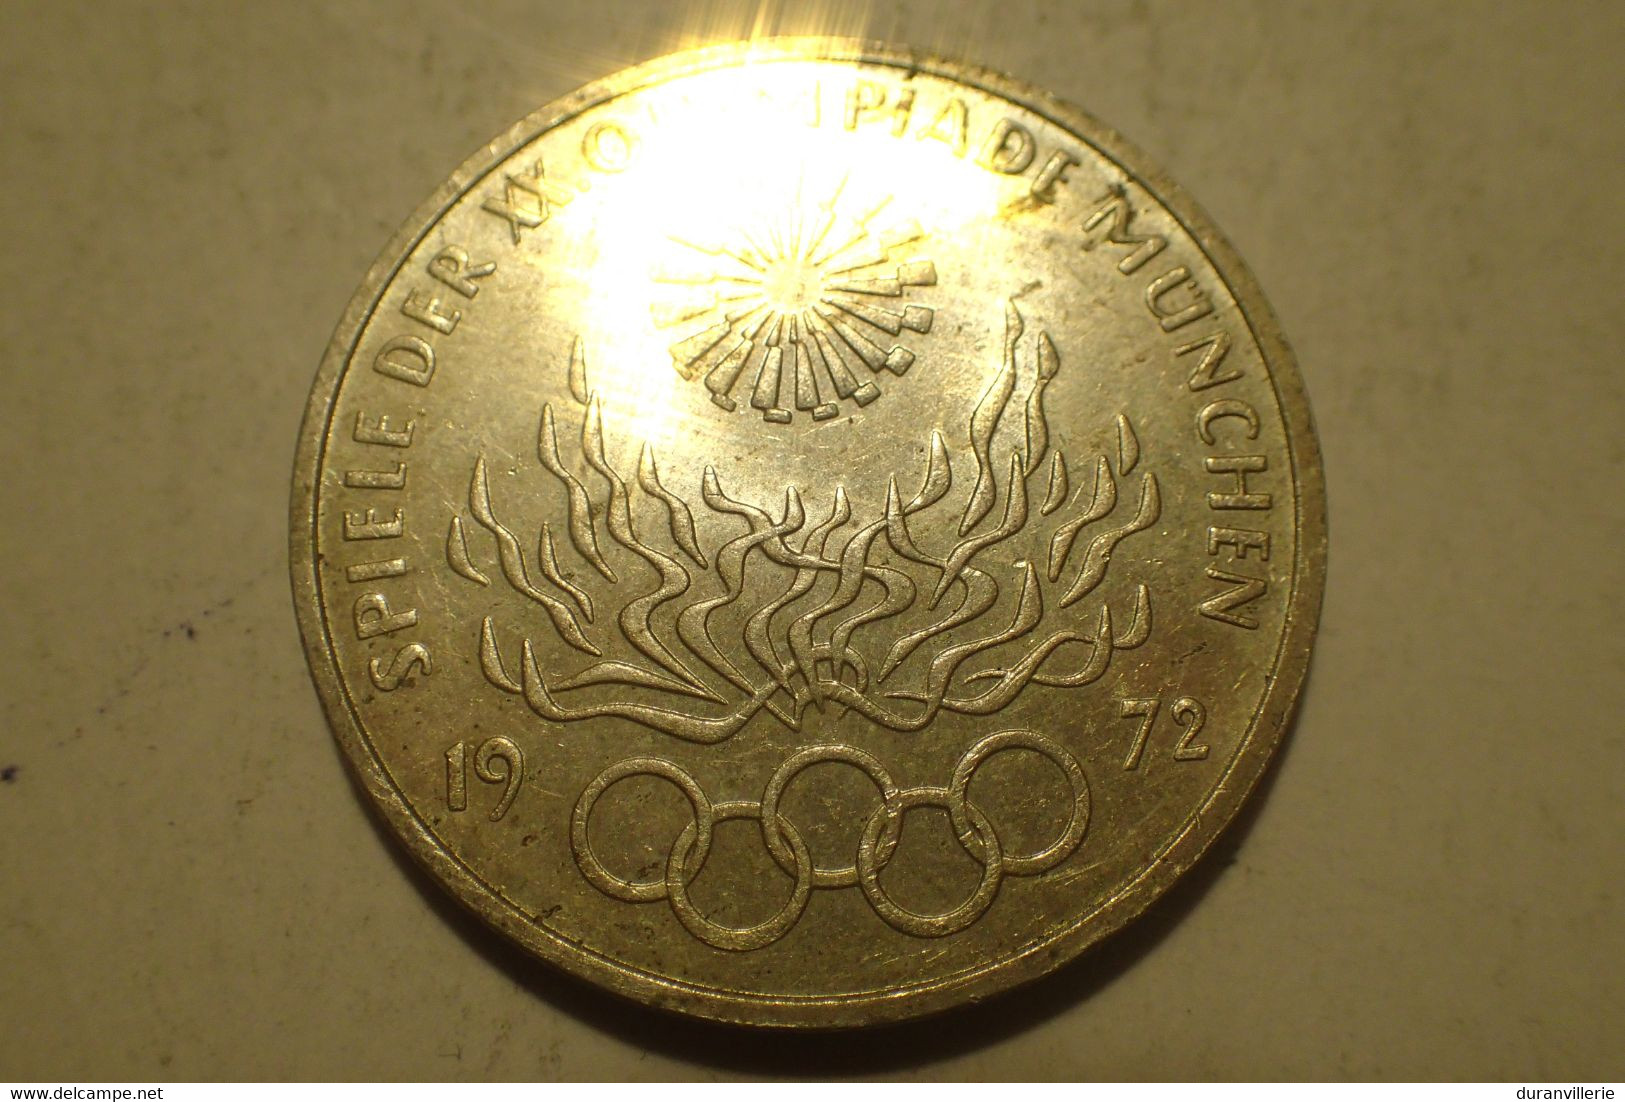 10 Mark Allemagne / Germany 1972 JO - Jeux Olympiques / Olympic Games - Munchen Munich - Argent / Silver SUP - Collections